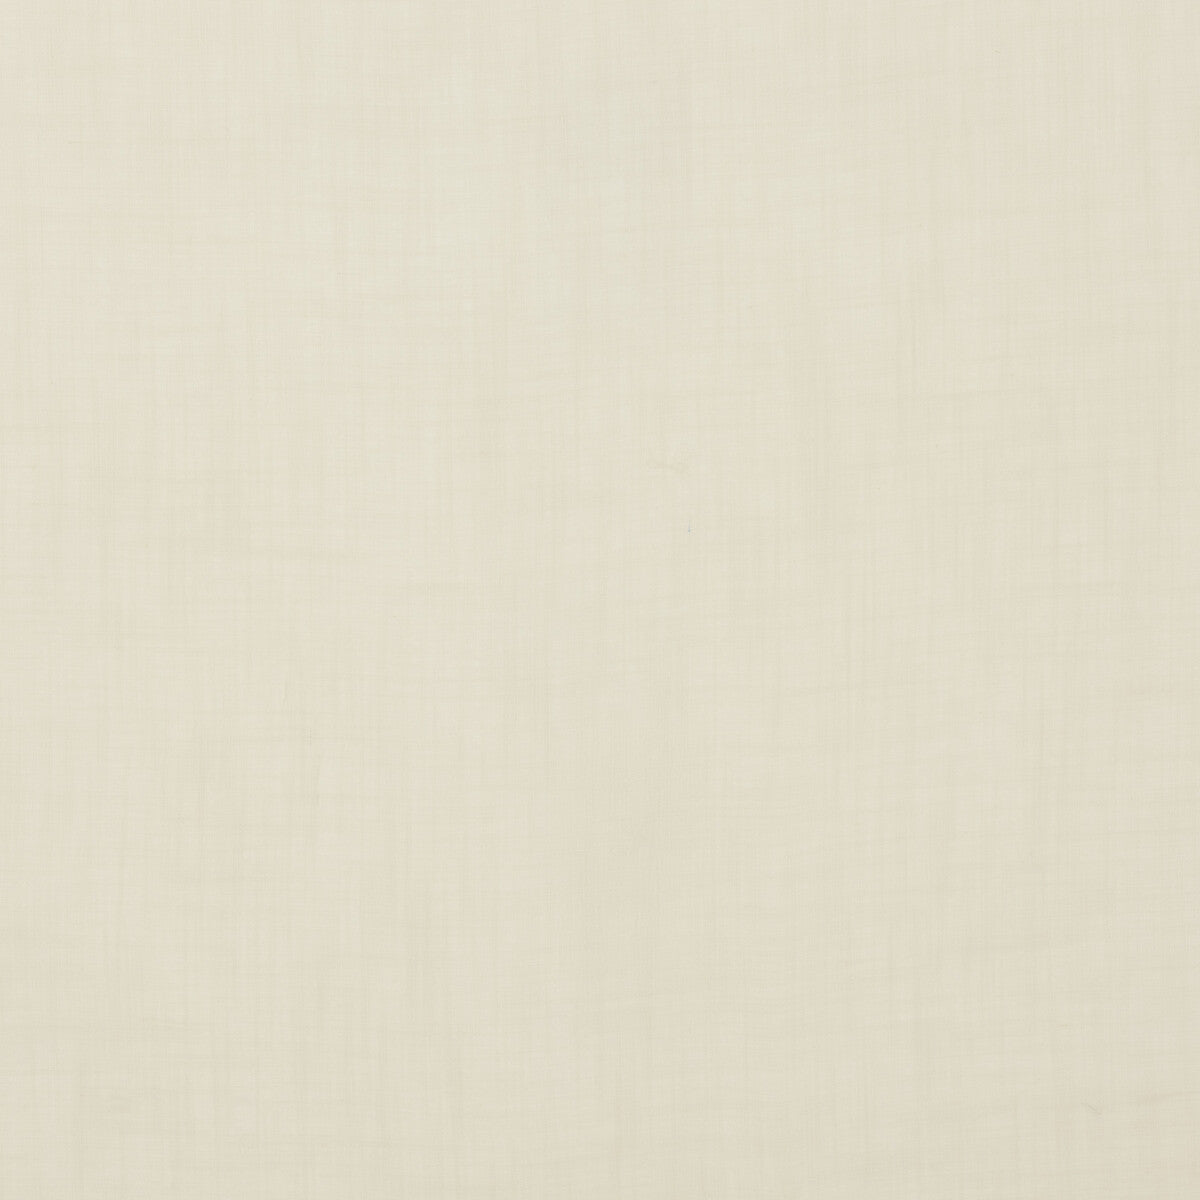 Kelso fabric in cream color - pattern PV1005.120.0 - by Baker Lifestyle in the Notebooks collection